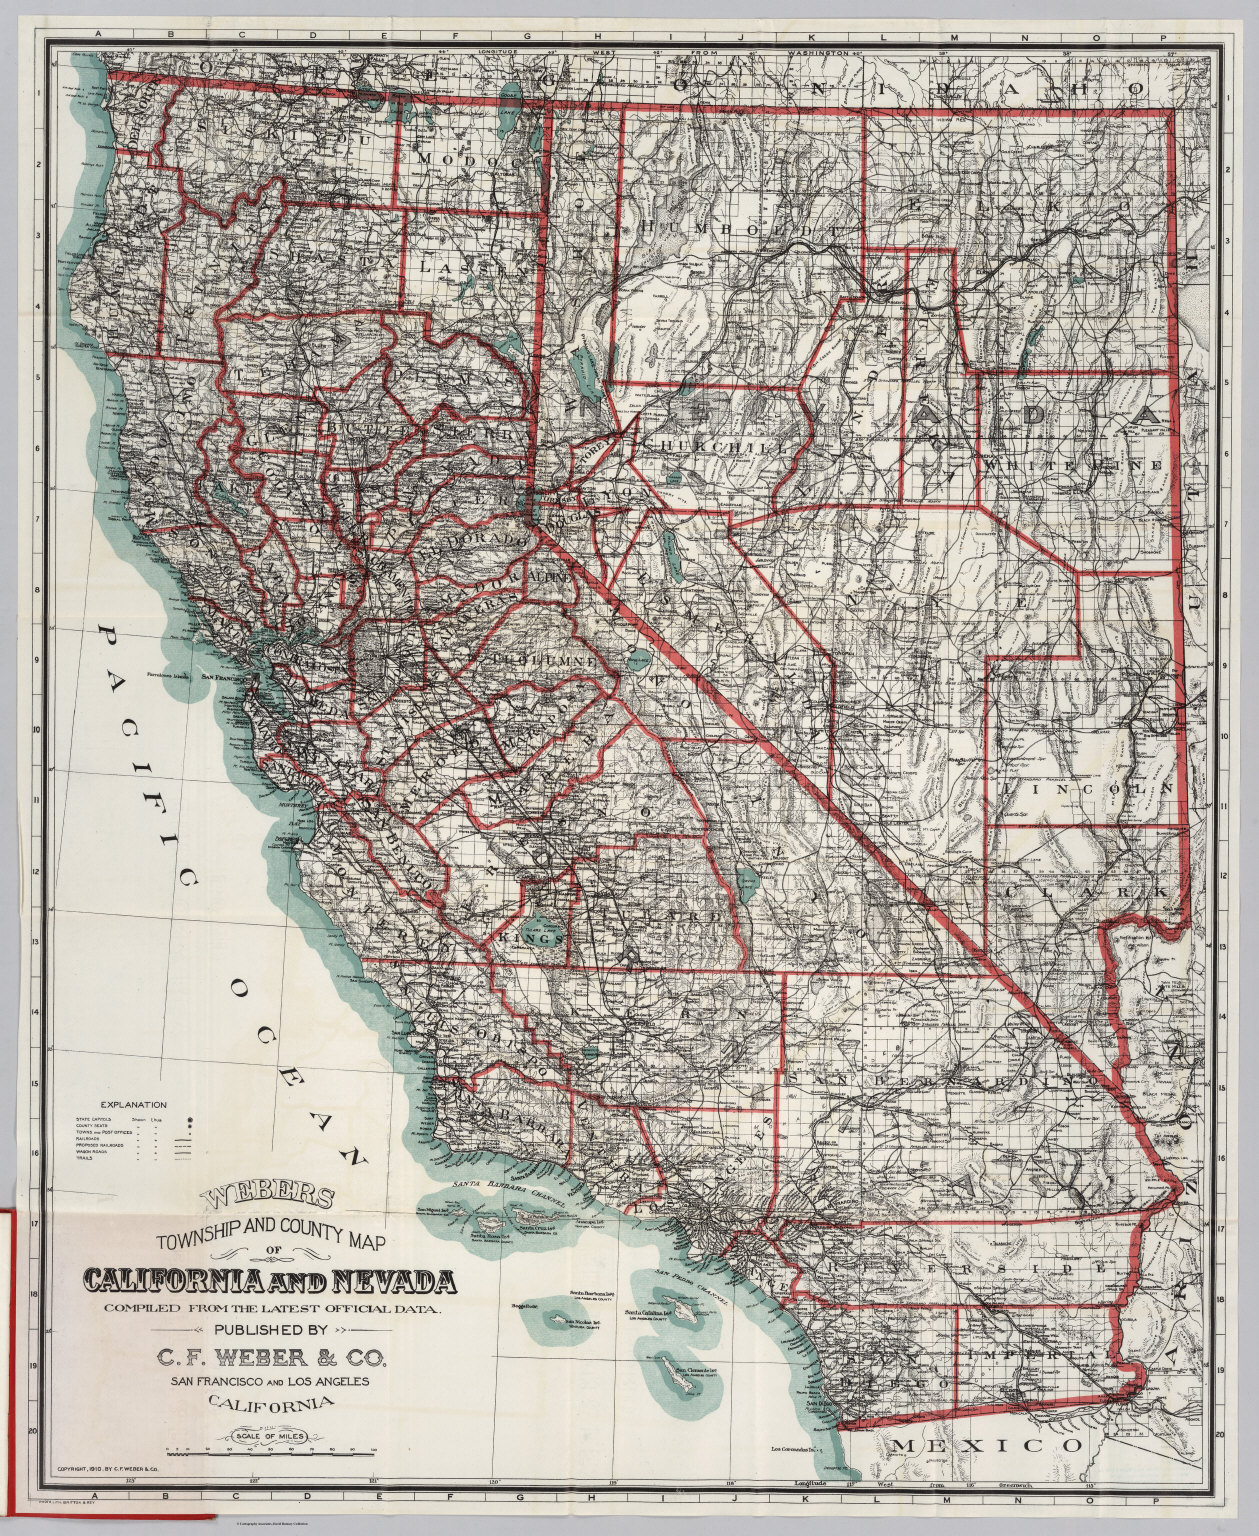 California And Nevada - David Rumsey Historical Map Collection